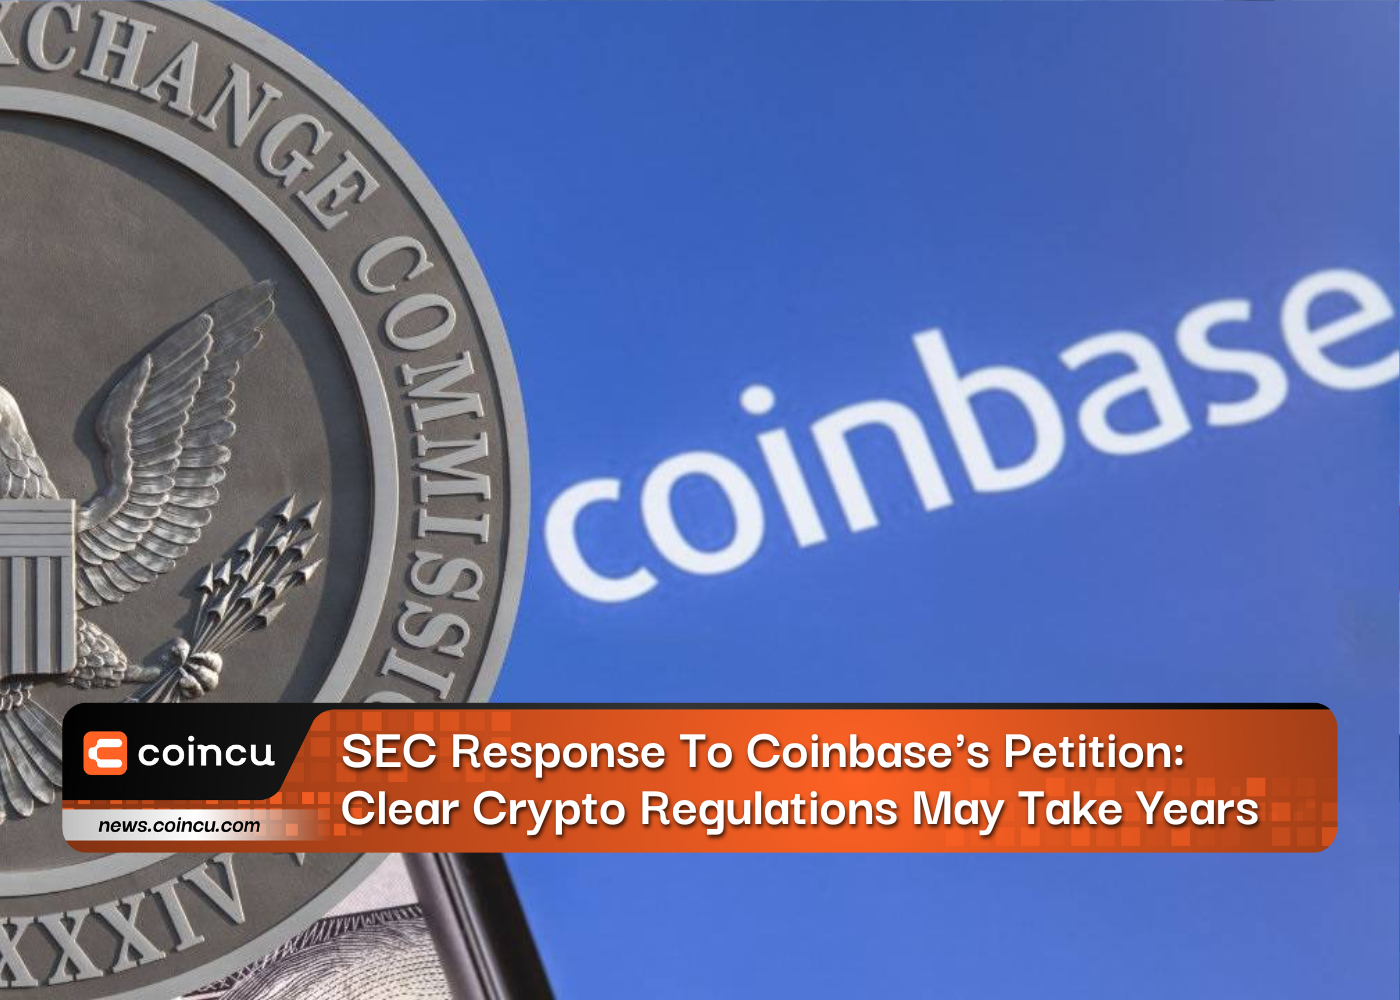 SEC Response To Coinbase's Petition: Clear Crypto Regulations May Take Years